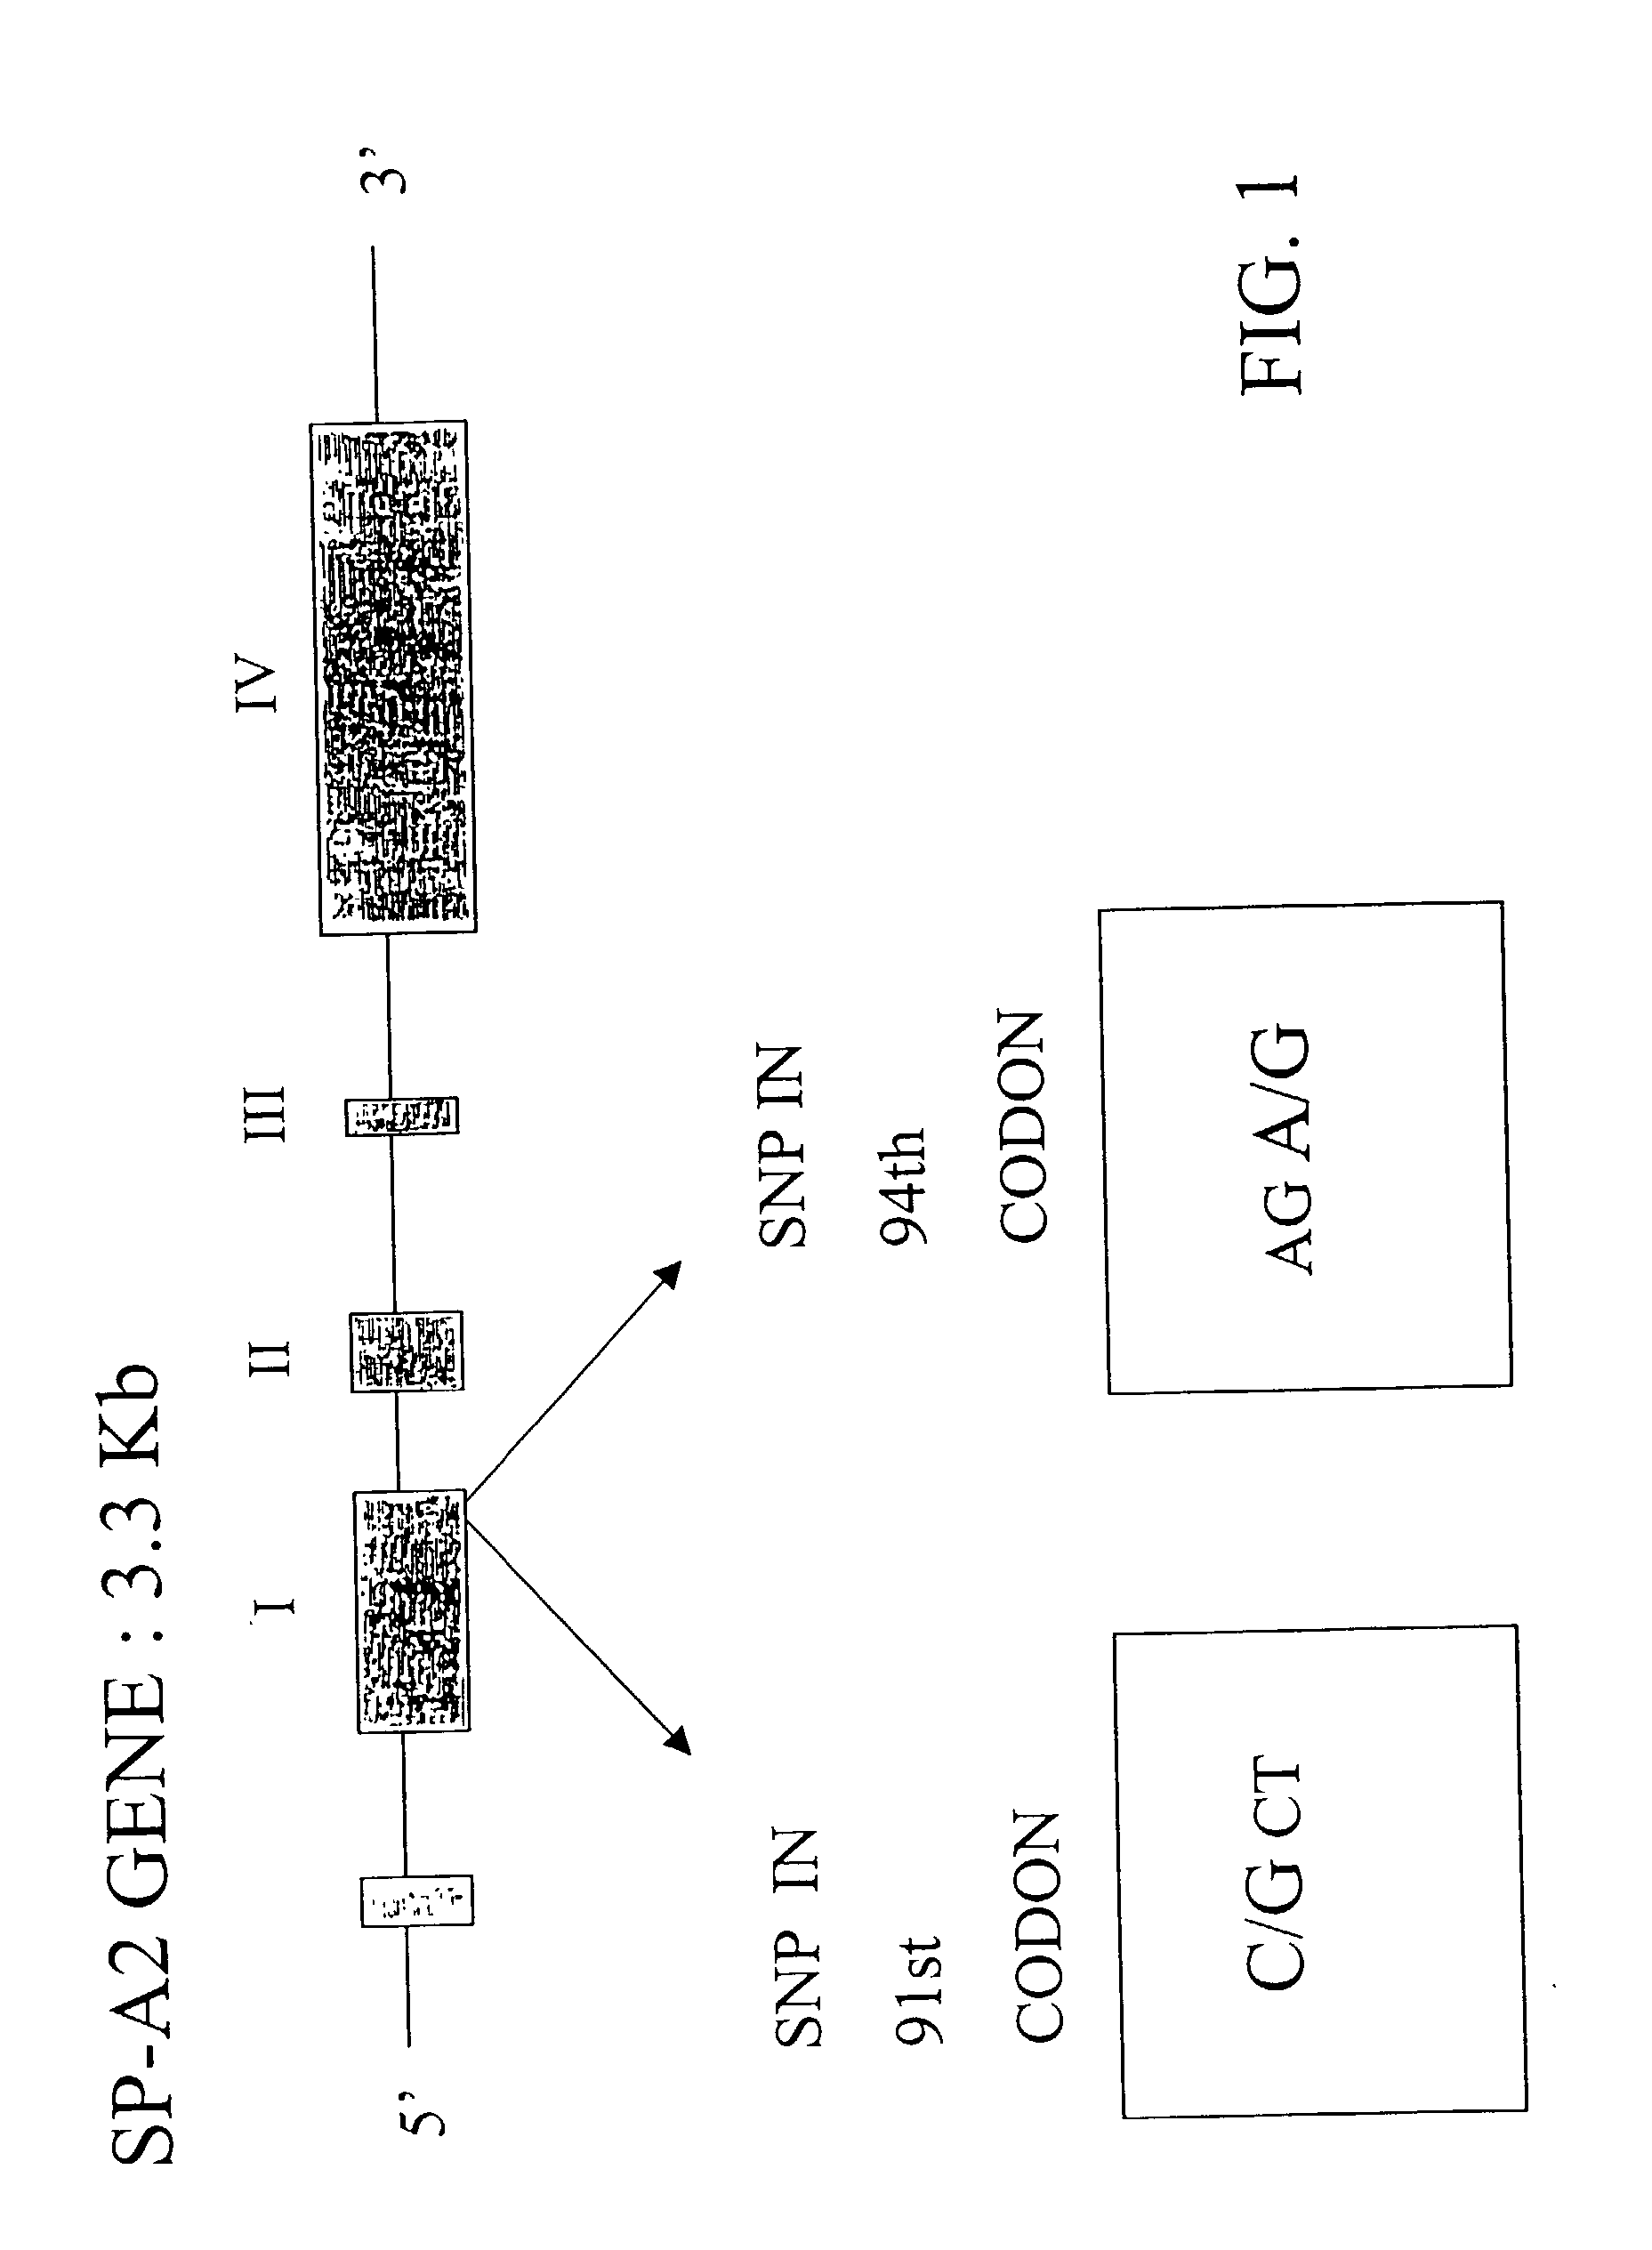 Method for detection of SP-A2 gene variants useful for prediction of predisposition to aspergillosis